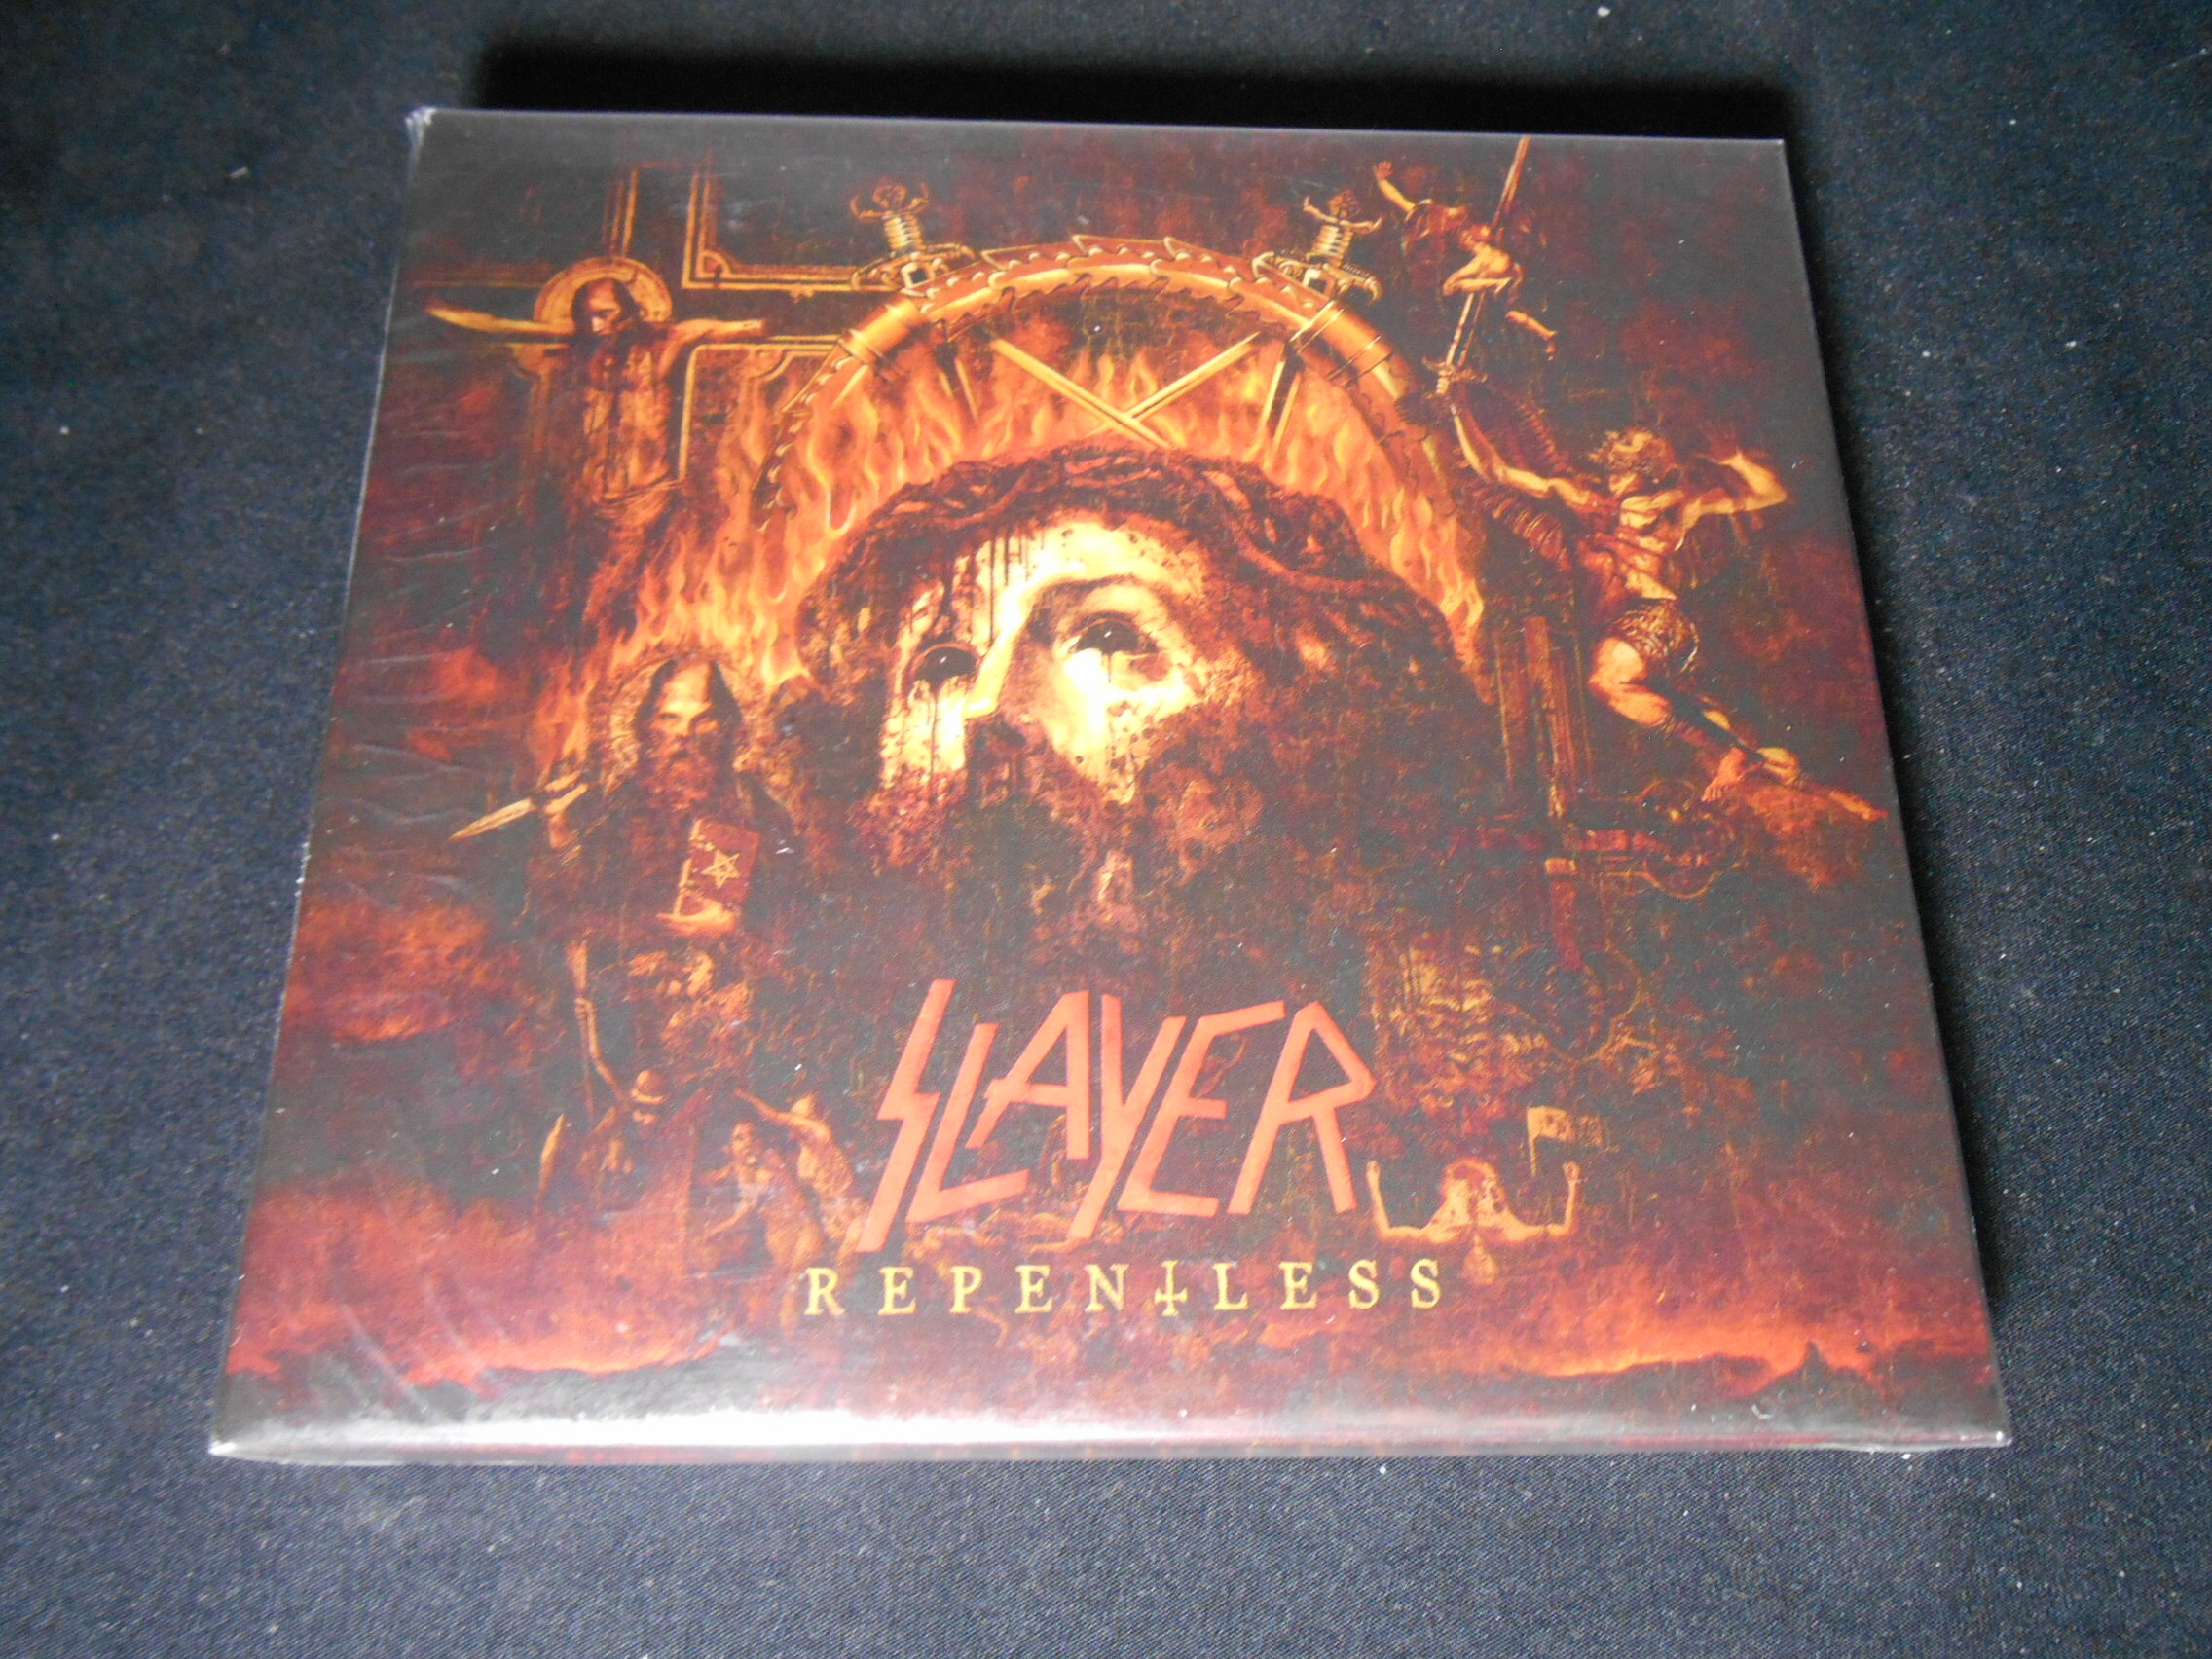 CD - Slayer - Repentless Limited Edition (CD+DVD/Digipack)